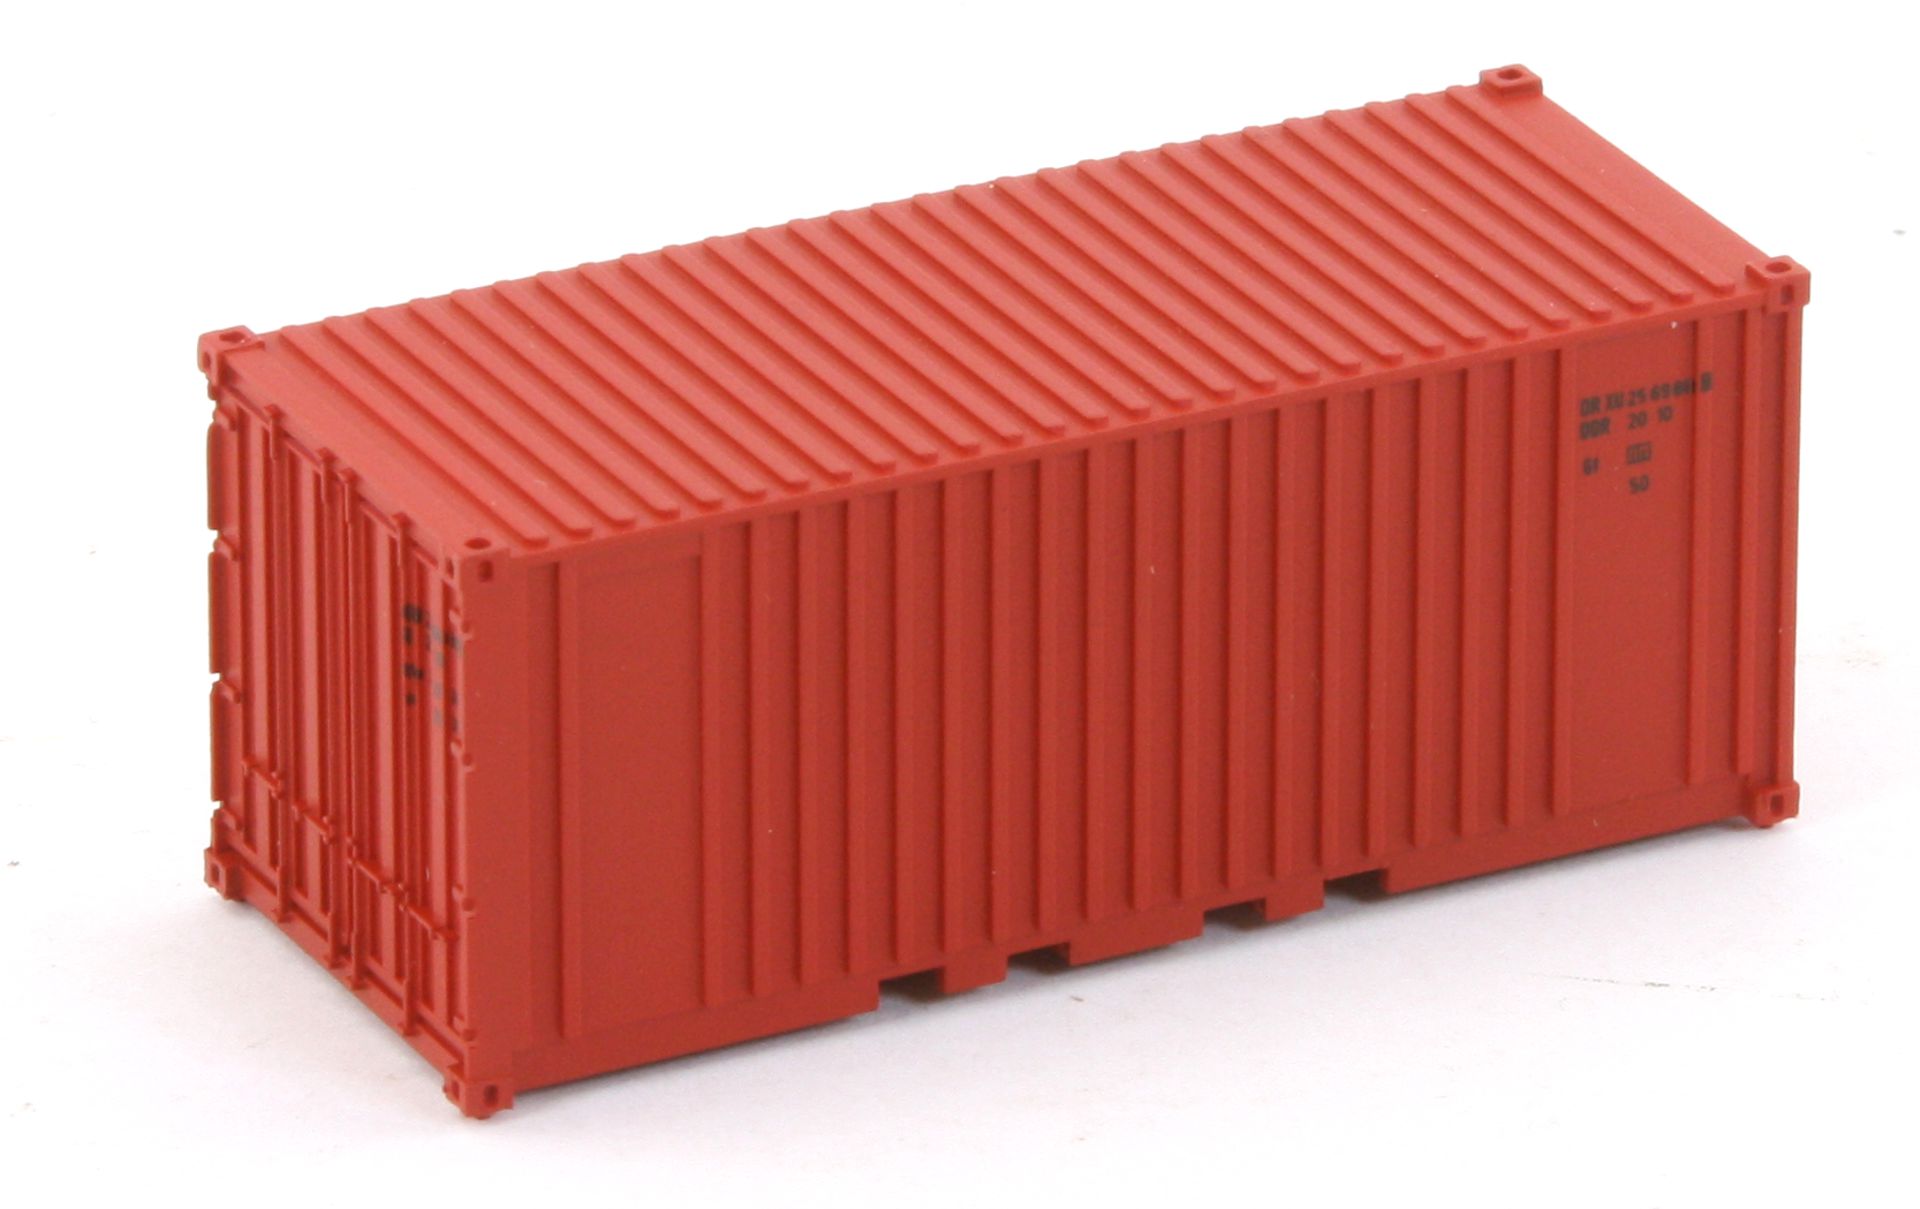 Hädl 711001-06 - Container, 20 Fuß, rot, DR